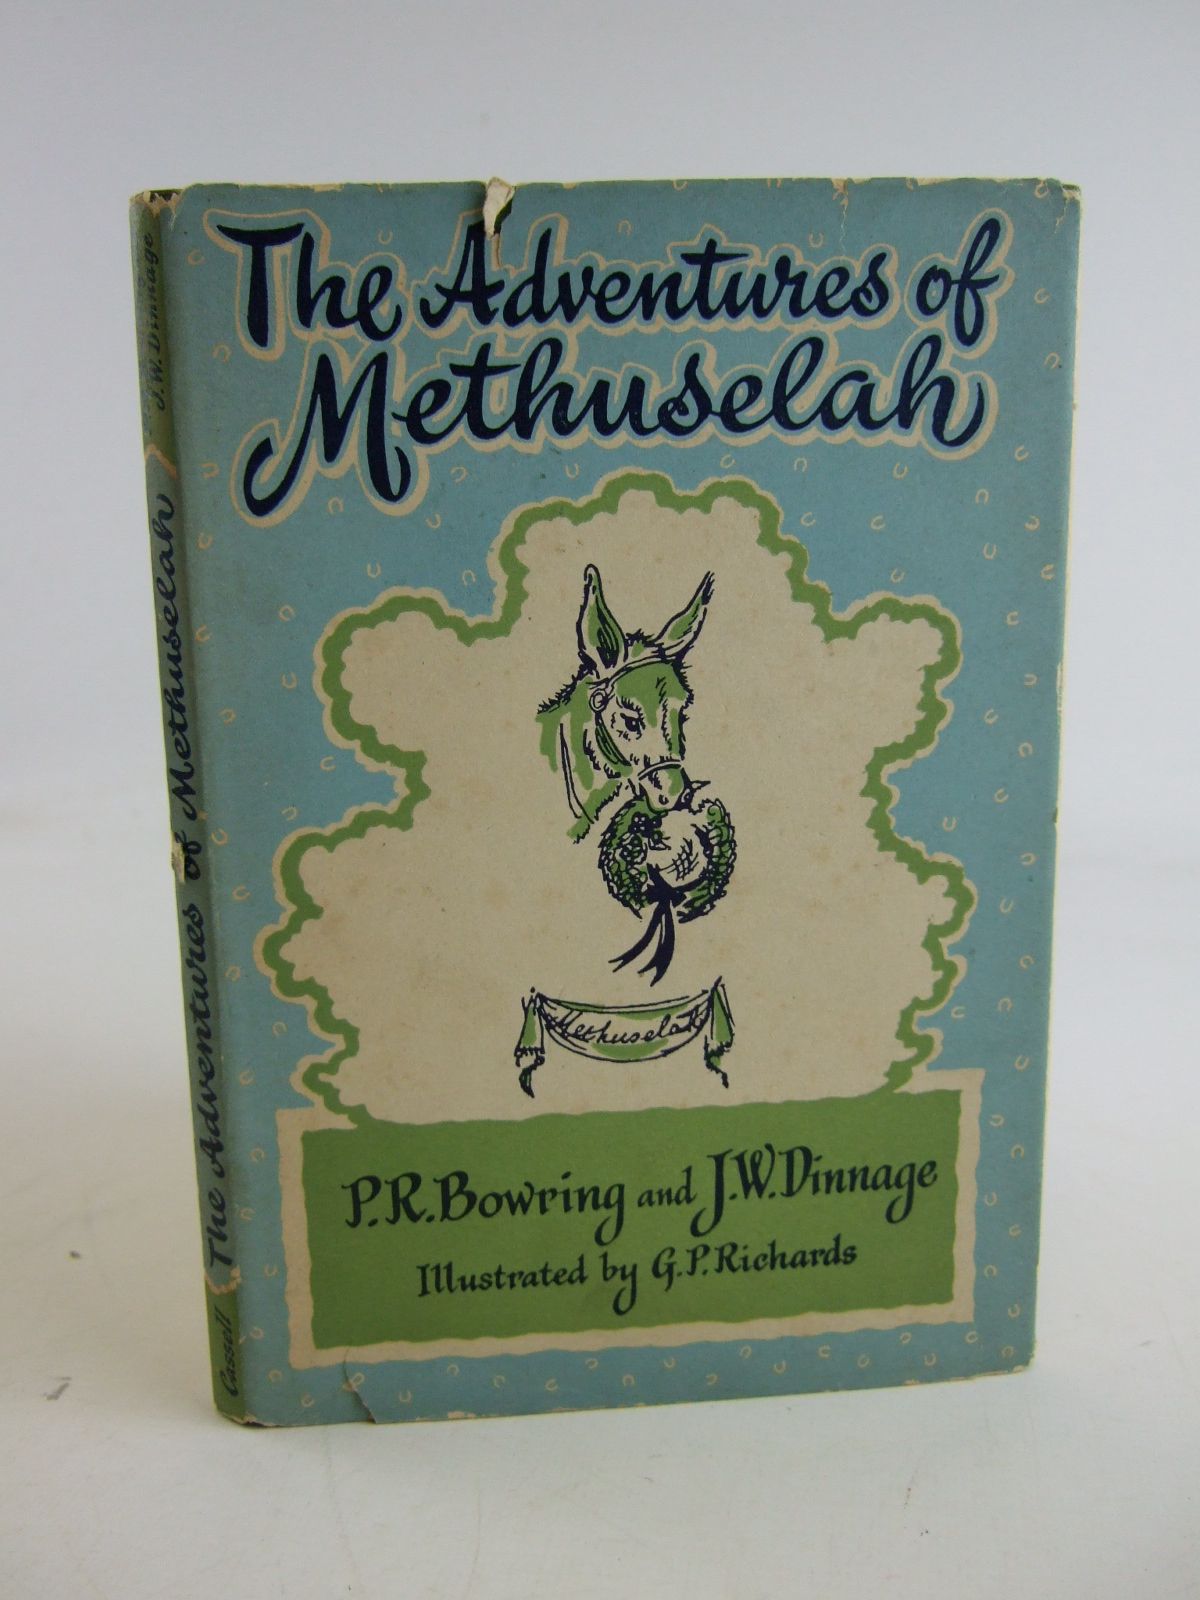 Photo of THE ADVENTURES OF METHUSELAH written by Bowring, P.R.
Dinnage, J.W. illustrated by Richards, G.P. published by Cassell & Company Ltd (STOCK CODE: 1807051)  for sale by Stella & Rose's Books